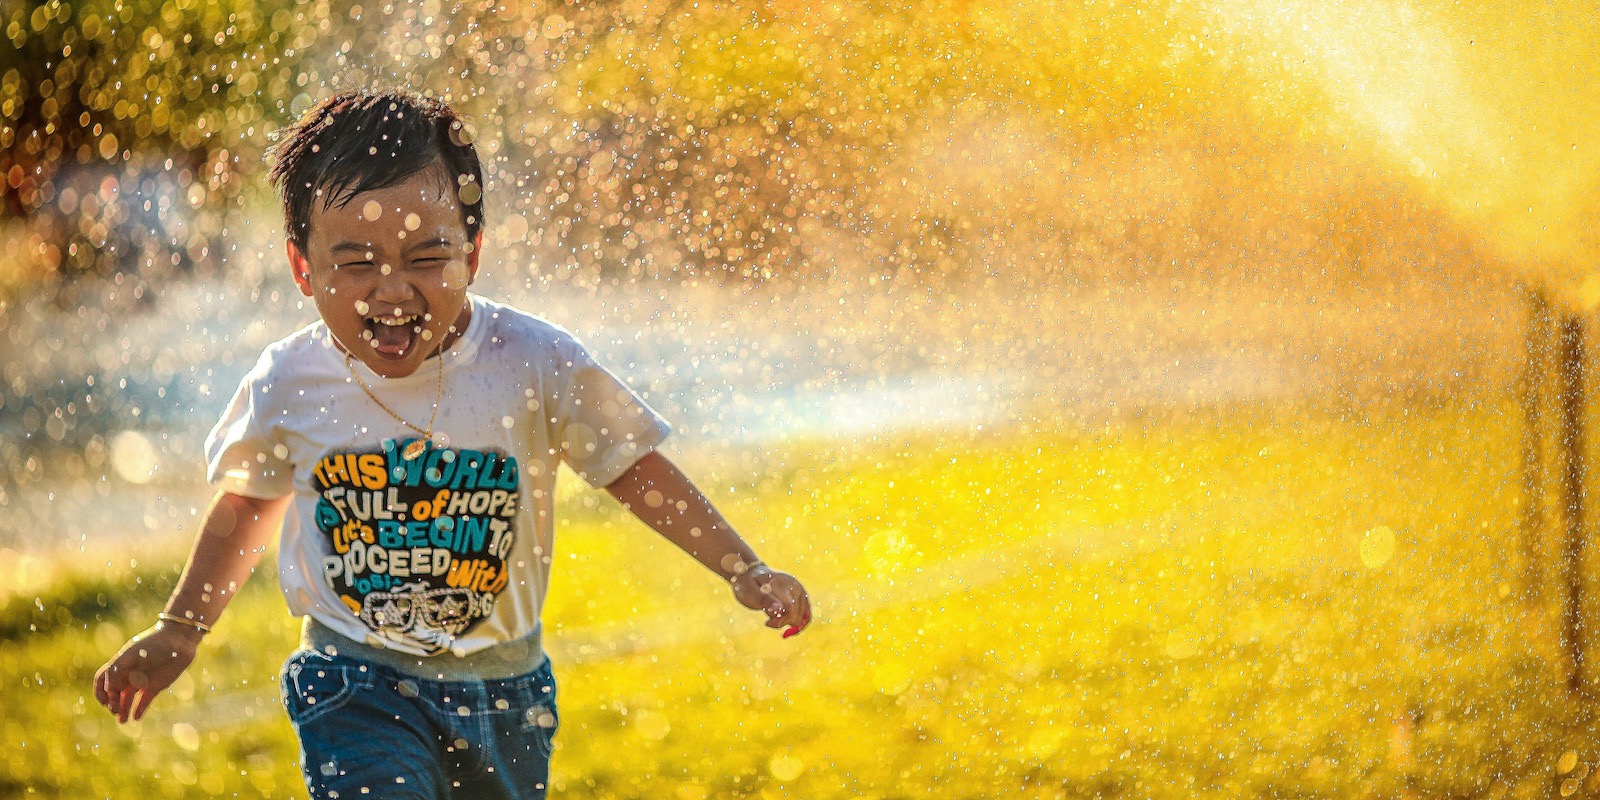 A young Asian boy with short hair, a graphic t-shirt and jeans smiles as he runs through a sprinkler with golden light and water splaying behind him.